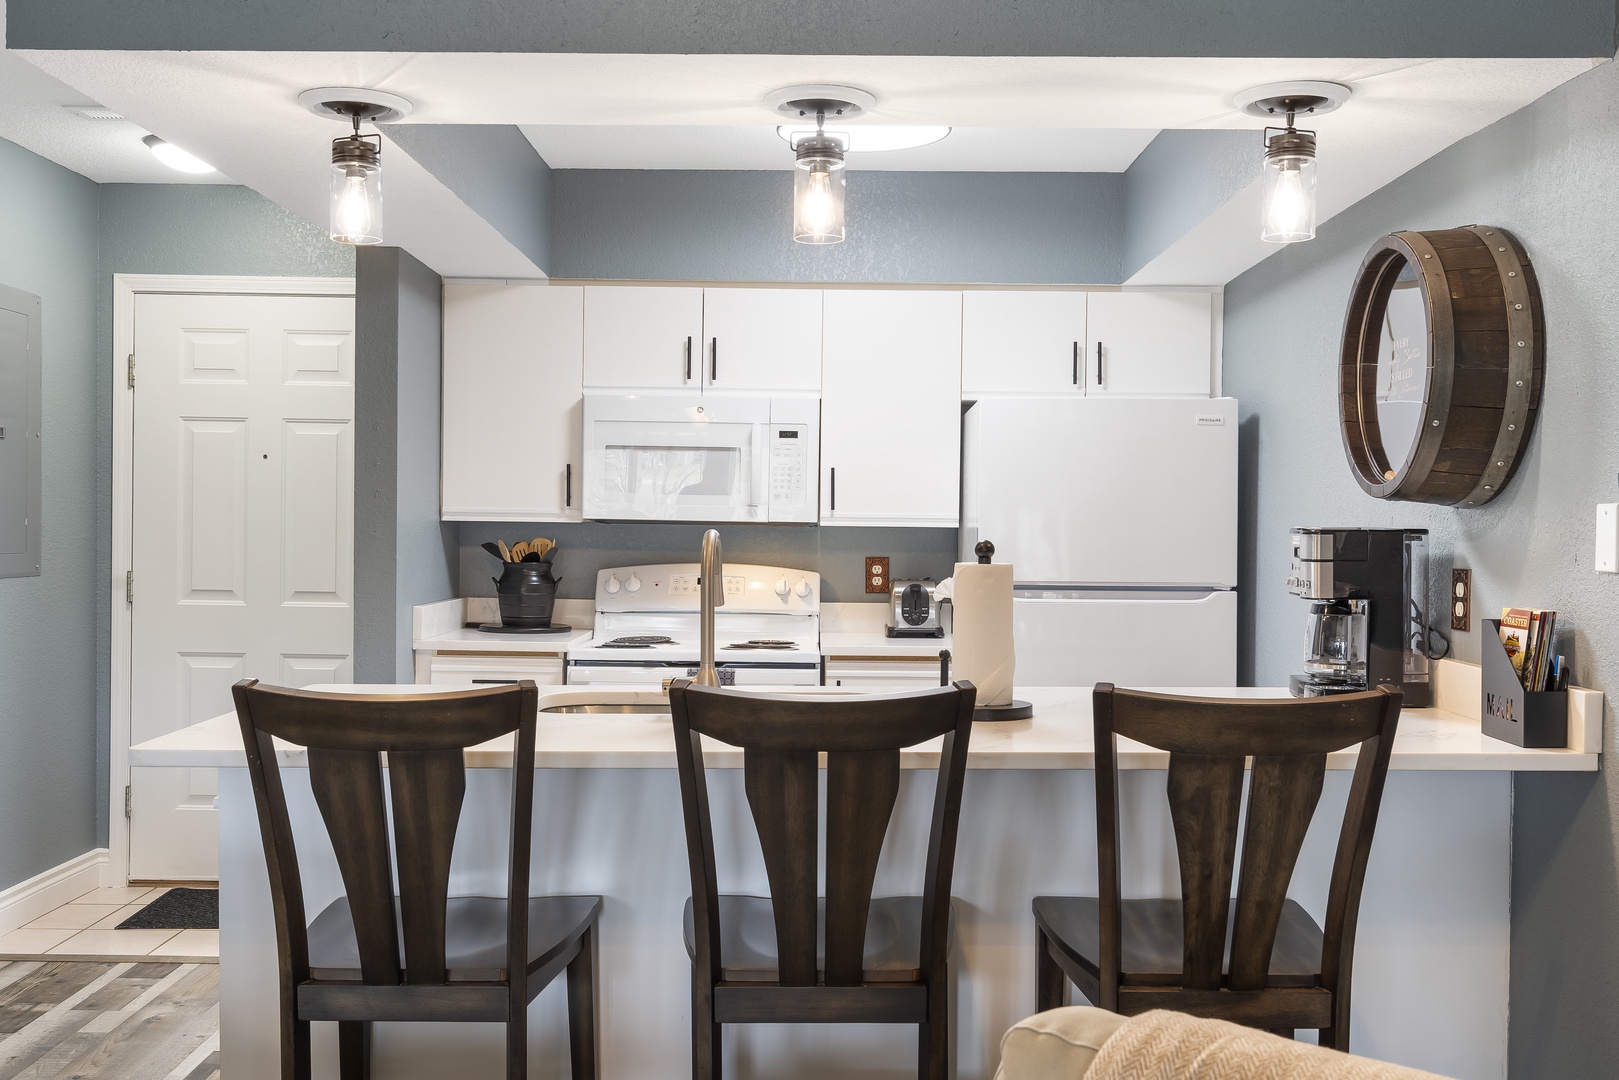 Sip morning coffee or grab a bite at the kitchen counter, with seating for 3